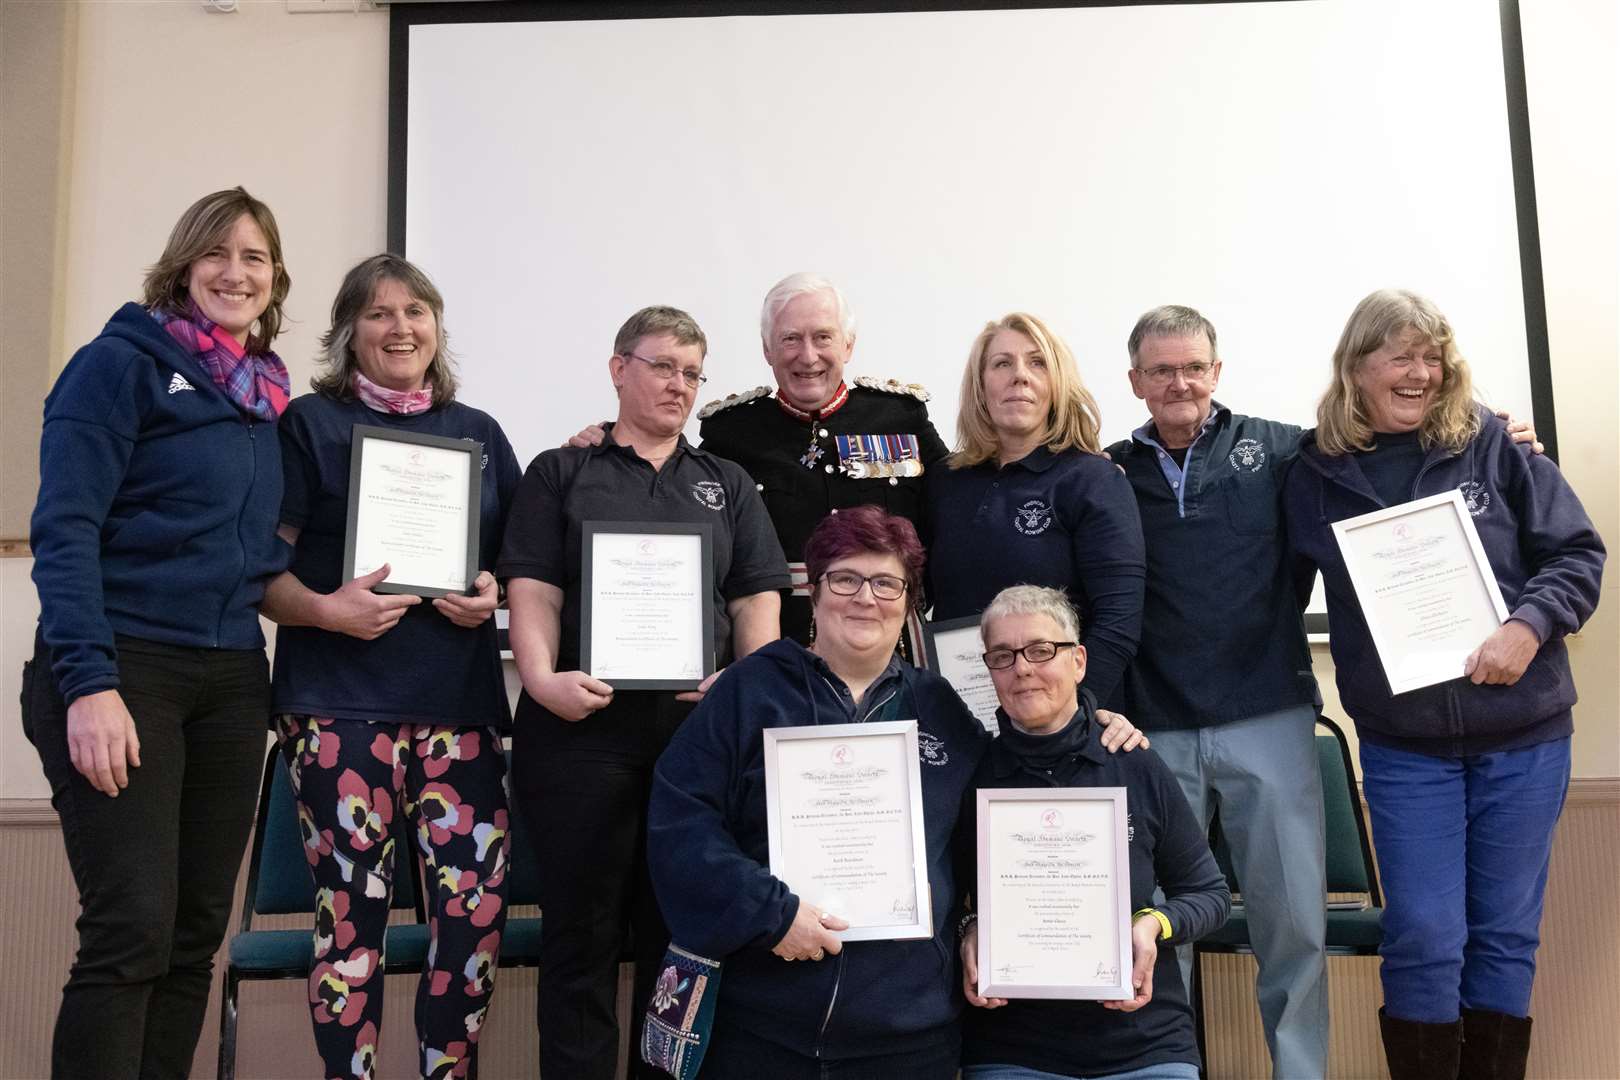 Dame Katherine Granger (left) and Lord-Lieutenant of Moray, Major General Seymour Monro (centre) presented Certificates of Commendation and Resuscitation Certificates to the Findhorn Coastal Rowing Club. Picture: Beth Taylor